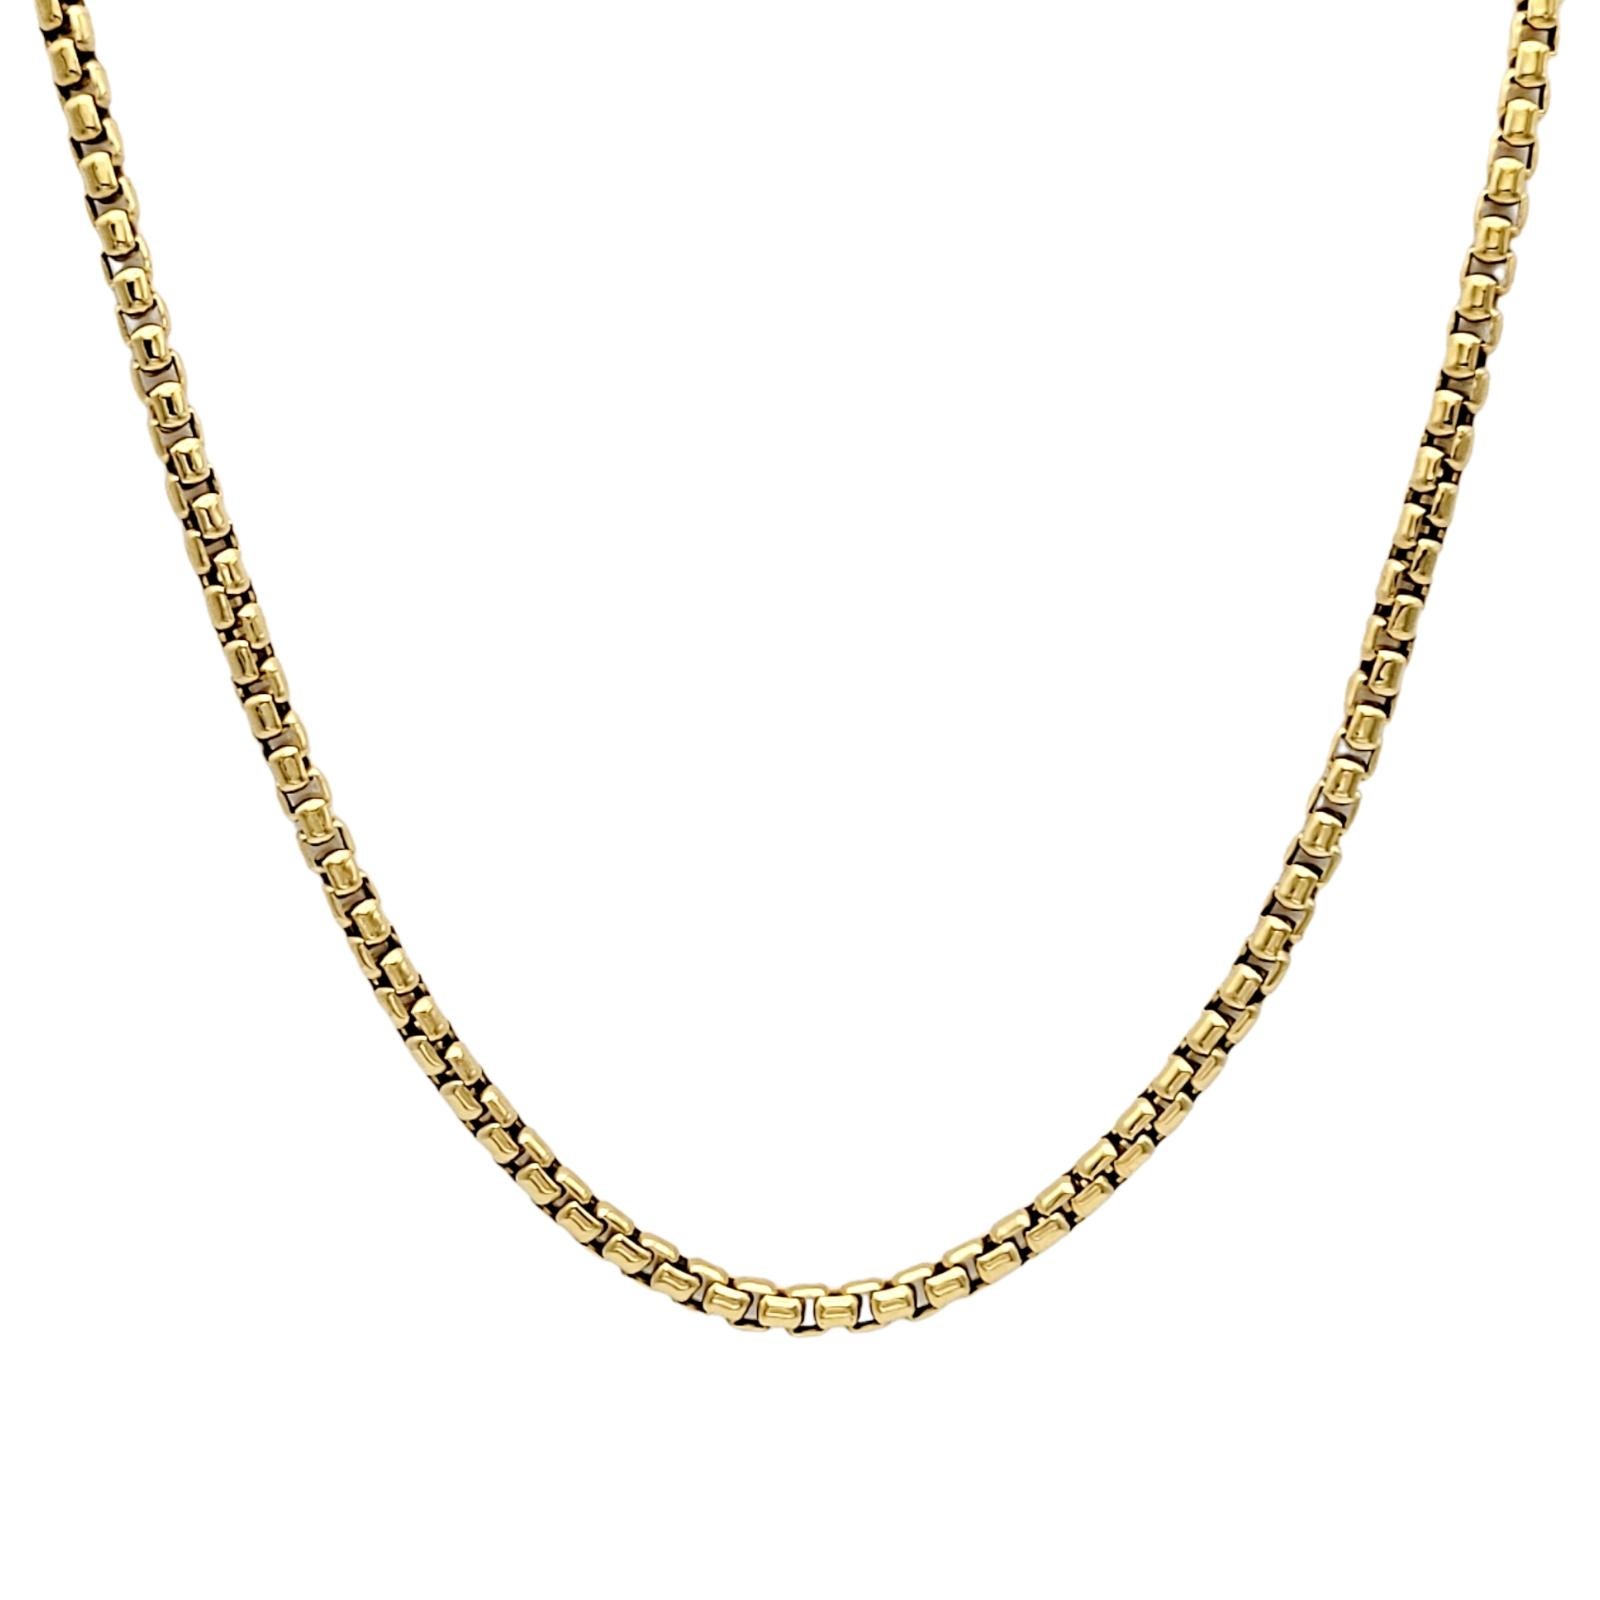 Introducing a timeless piece of luxury jewelry: the David Yurman box chain necklace in 18-karat yellow gold. Crafted by the renowned brand David Yurman, this exquisite necklace exudes elegance and sophistication.

Made from polished 18-karat yellow